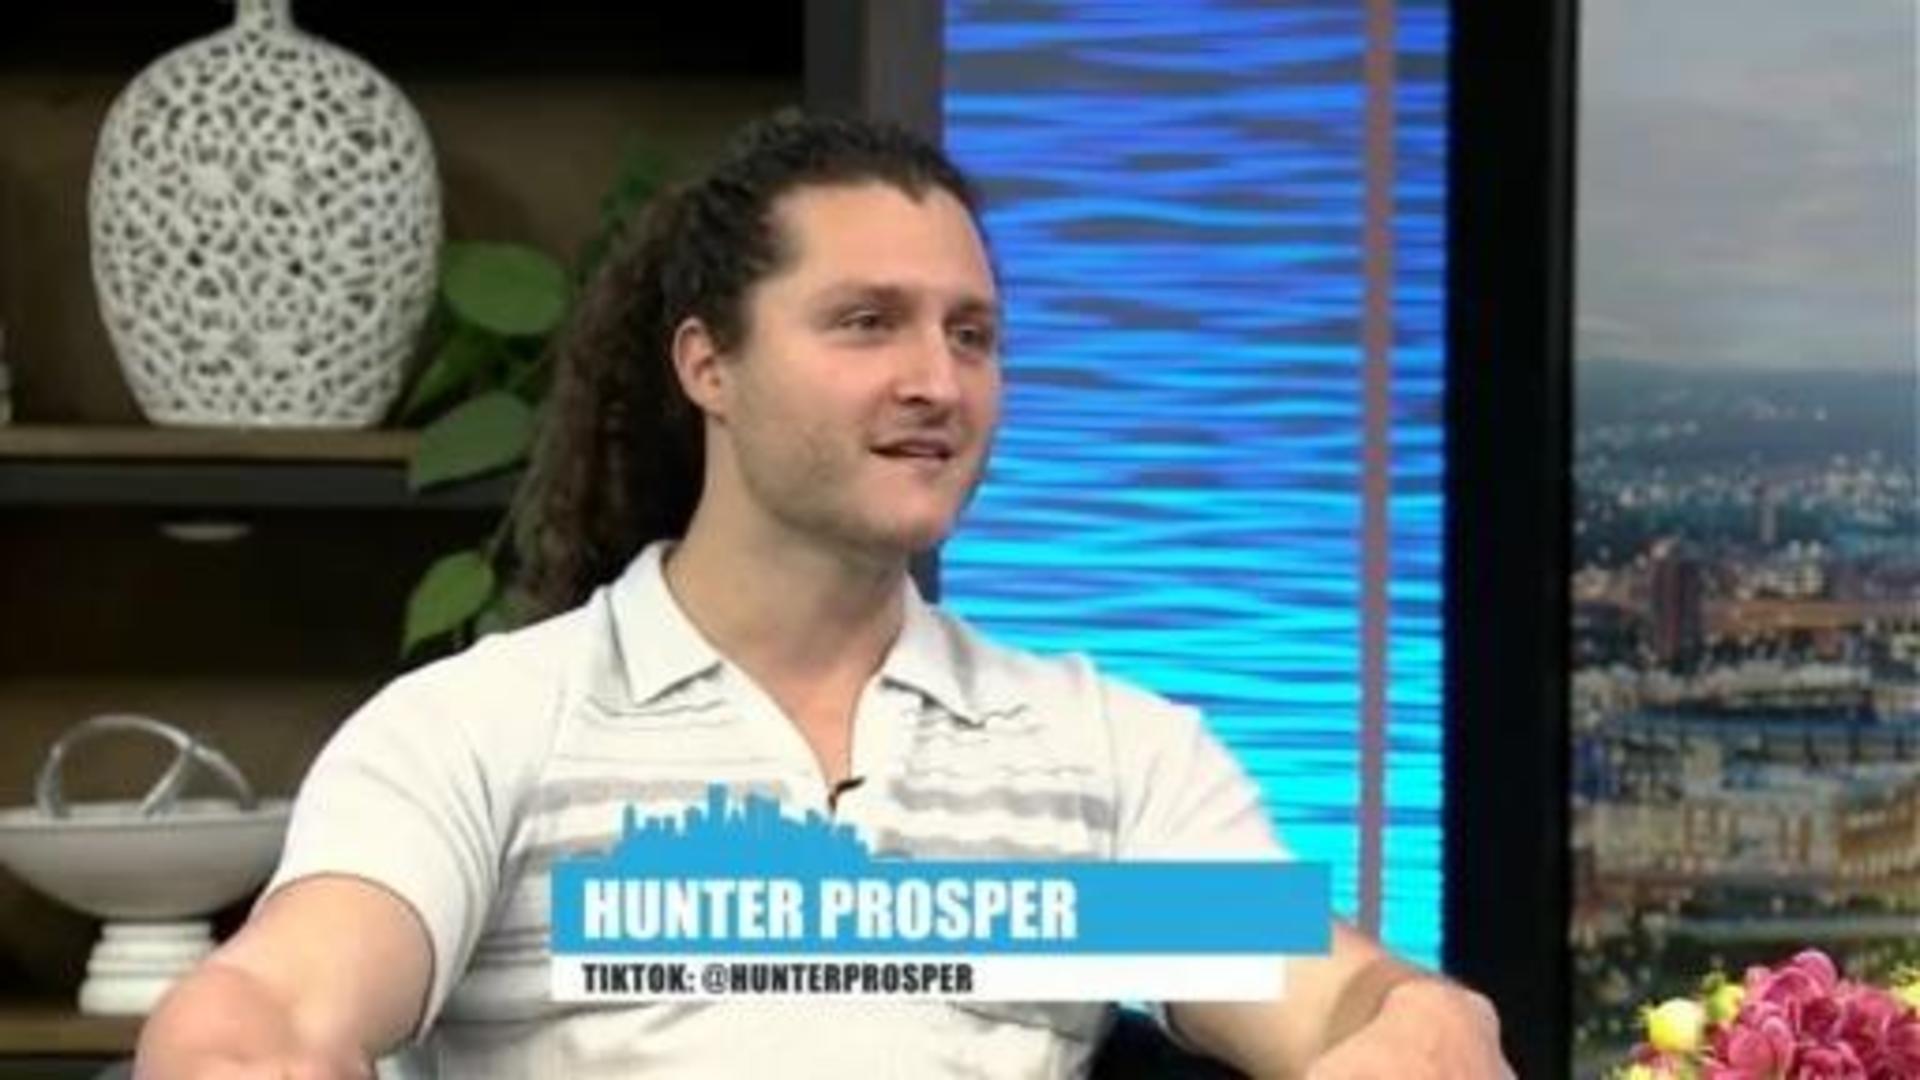 Hunter Prosper joins Talk Pittsburgh to talk about his viral